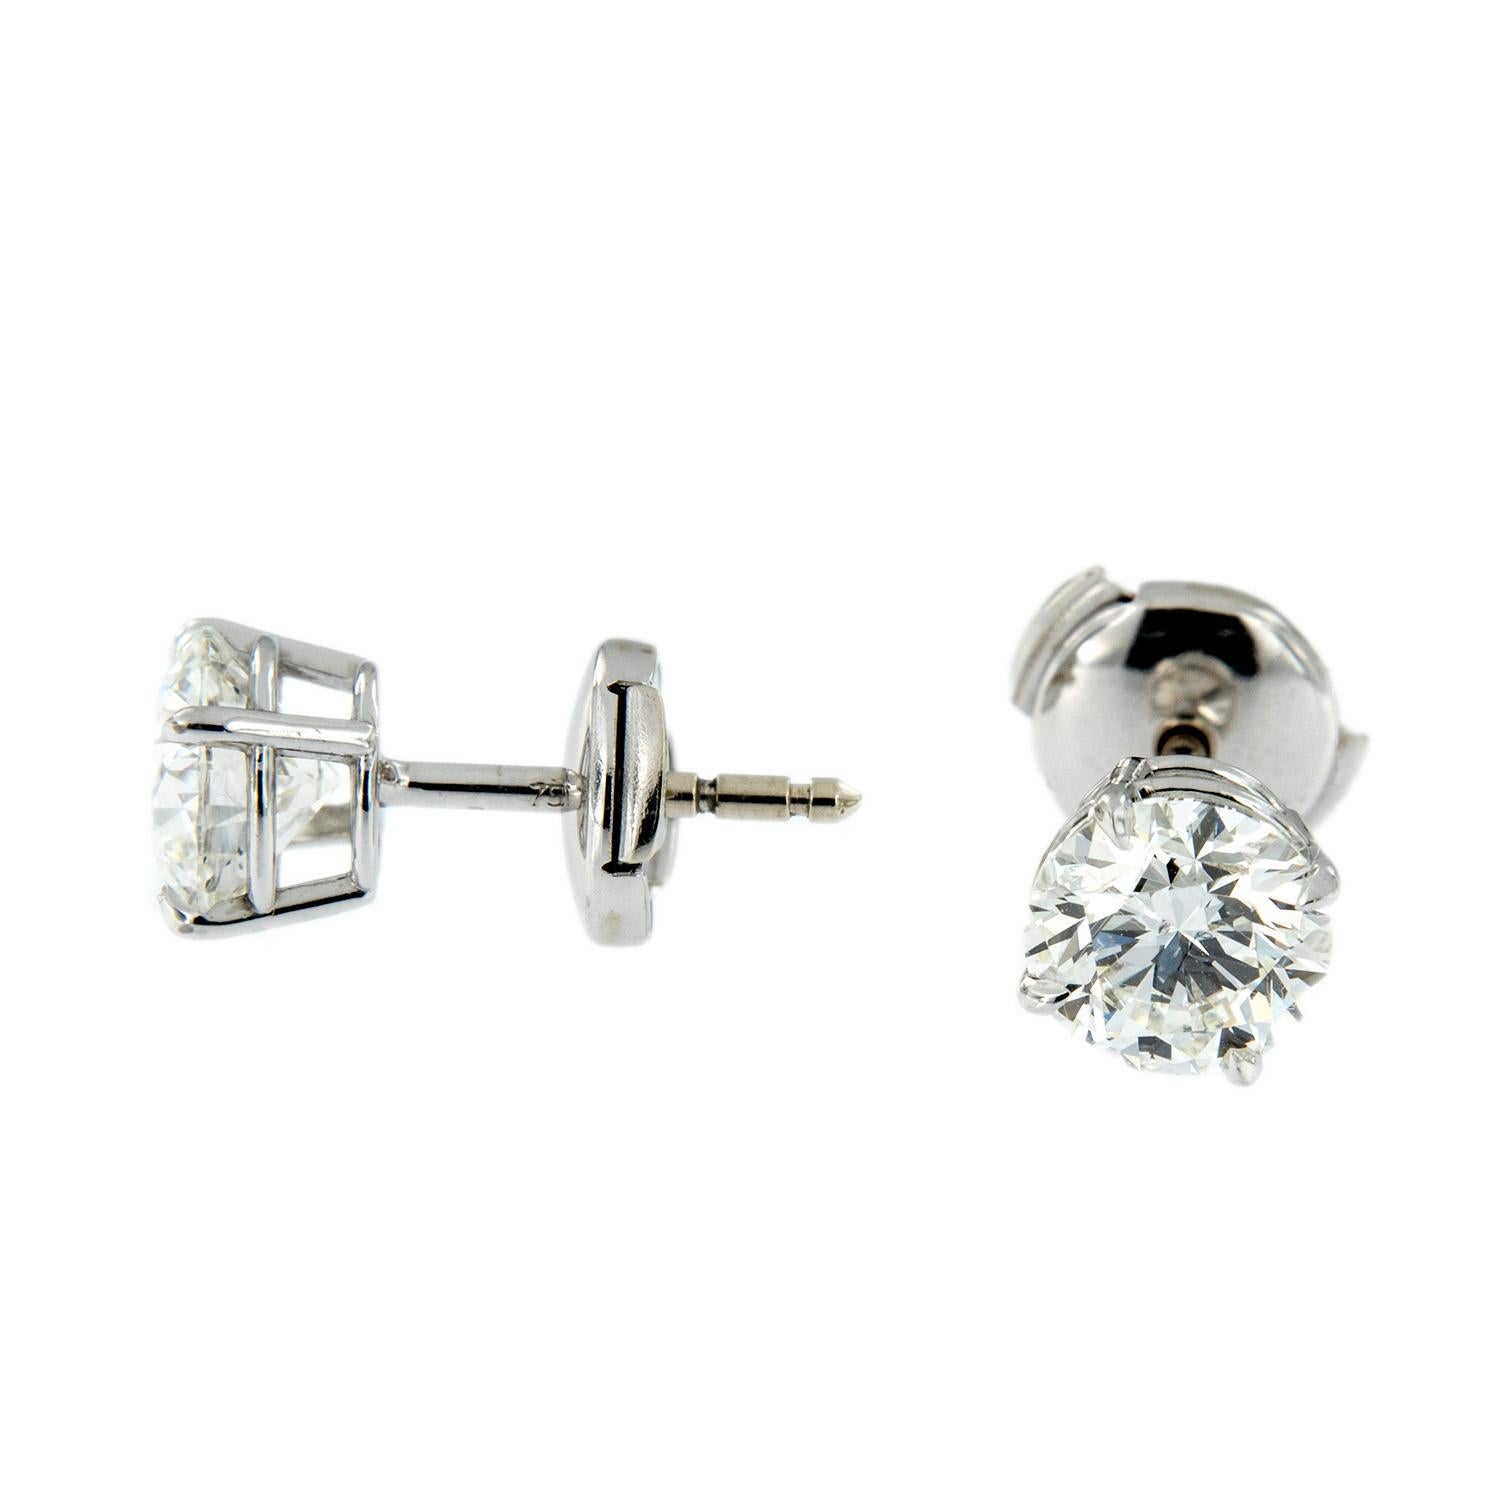 These beautiful earrings are crafted in enduring platinum. Each diamond is over 1 carat and in a four prong setting with locking Guardian backs for a  secure fit. Weigh 2.7 grams.

Diamonds 2.46 cttw
GIA #17178718. GIA #16845734